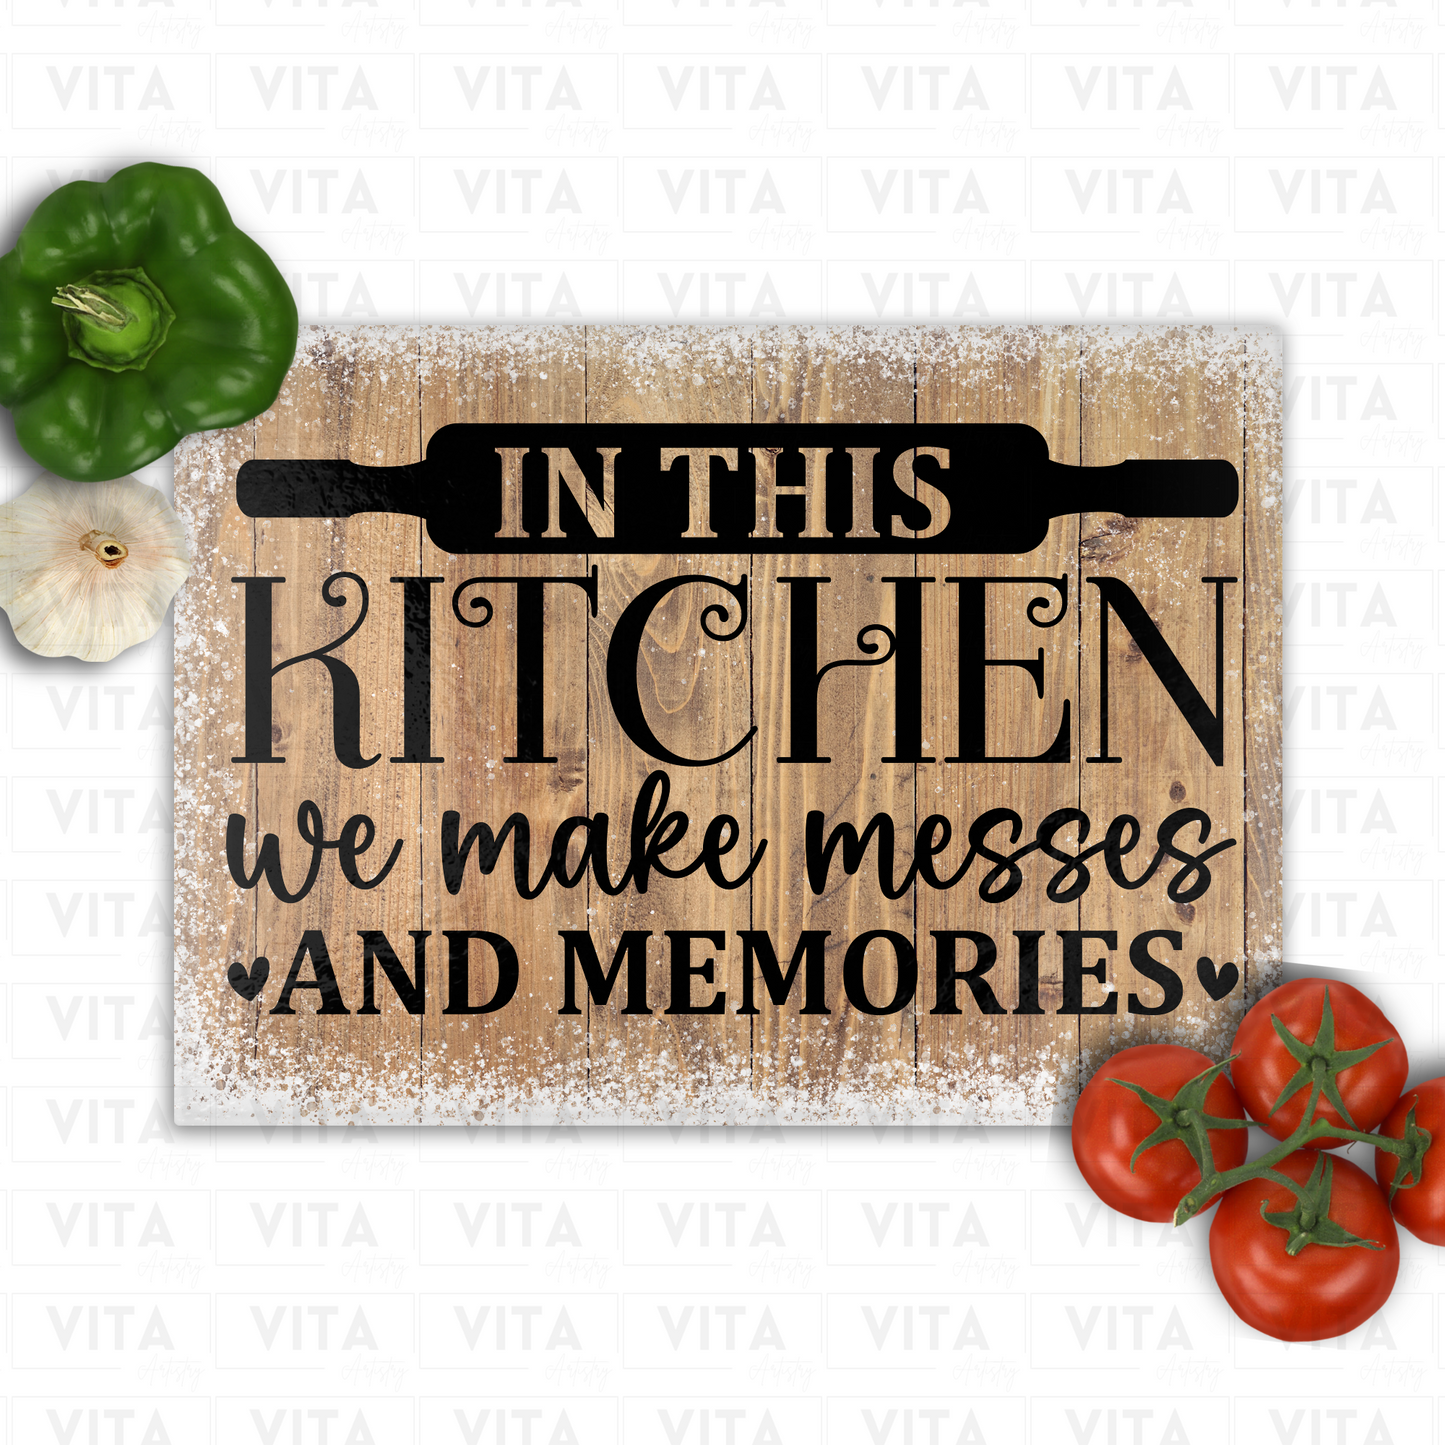 In this Kitchen We Make Messes and Memories - Glass Cutting Board